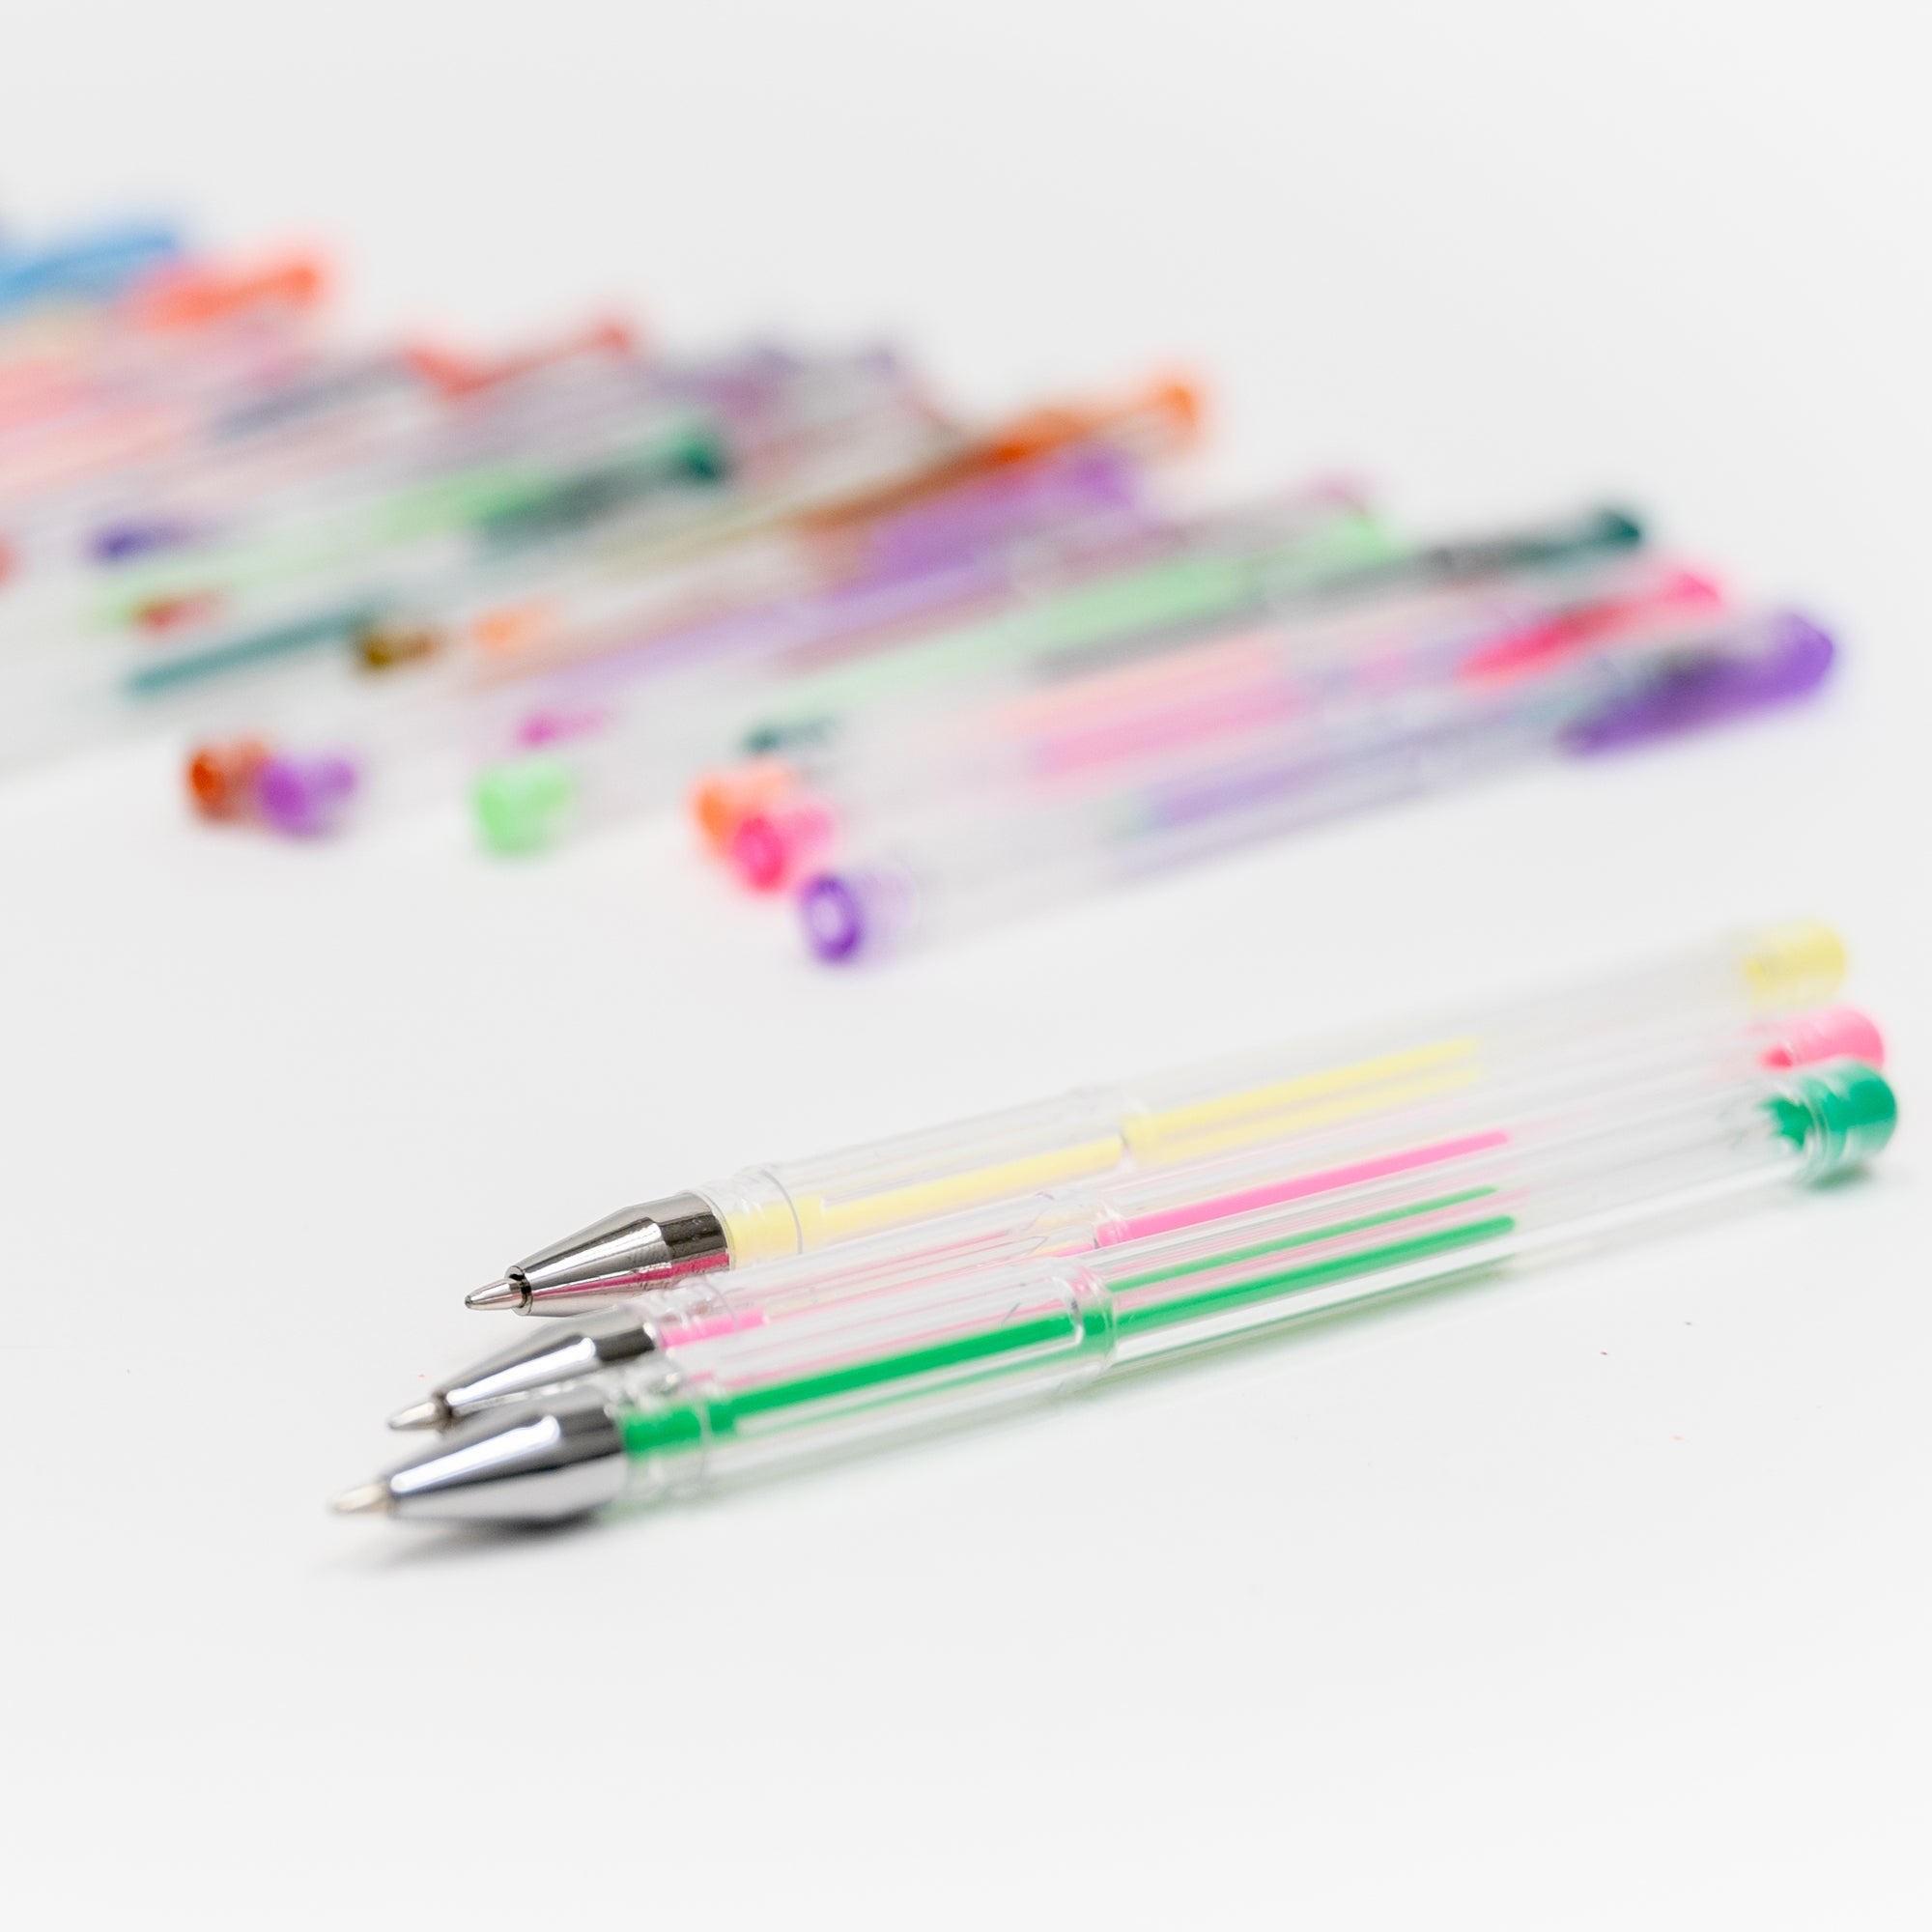 Colored Gel Pen, 30 Colored Gel Pen with 30 Refills - Set of 60